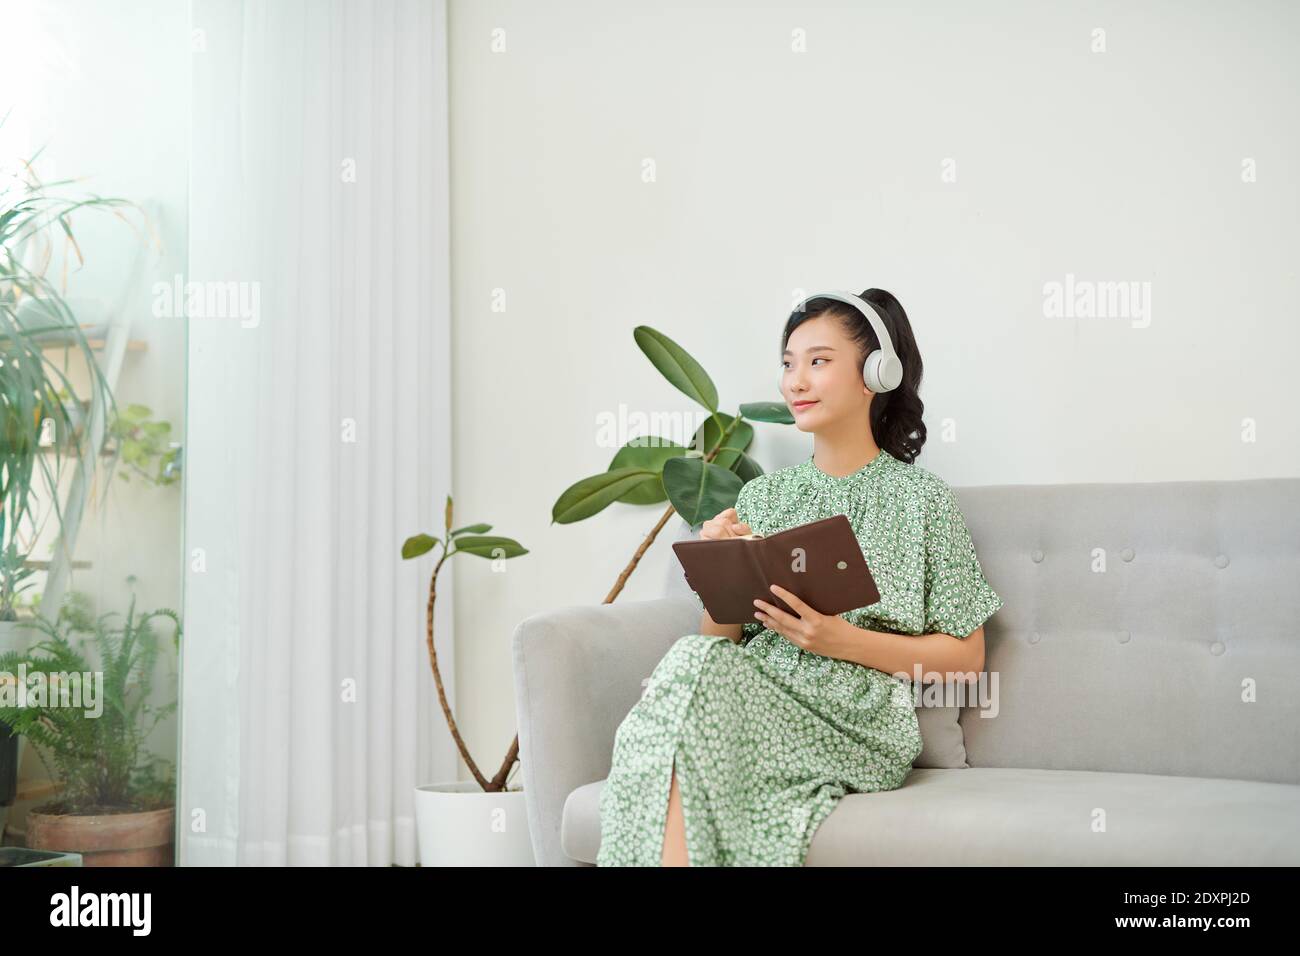 mage of focused asian woman using headphones and writing down notes while sitting on sofa at home Stock Photo